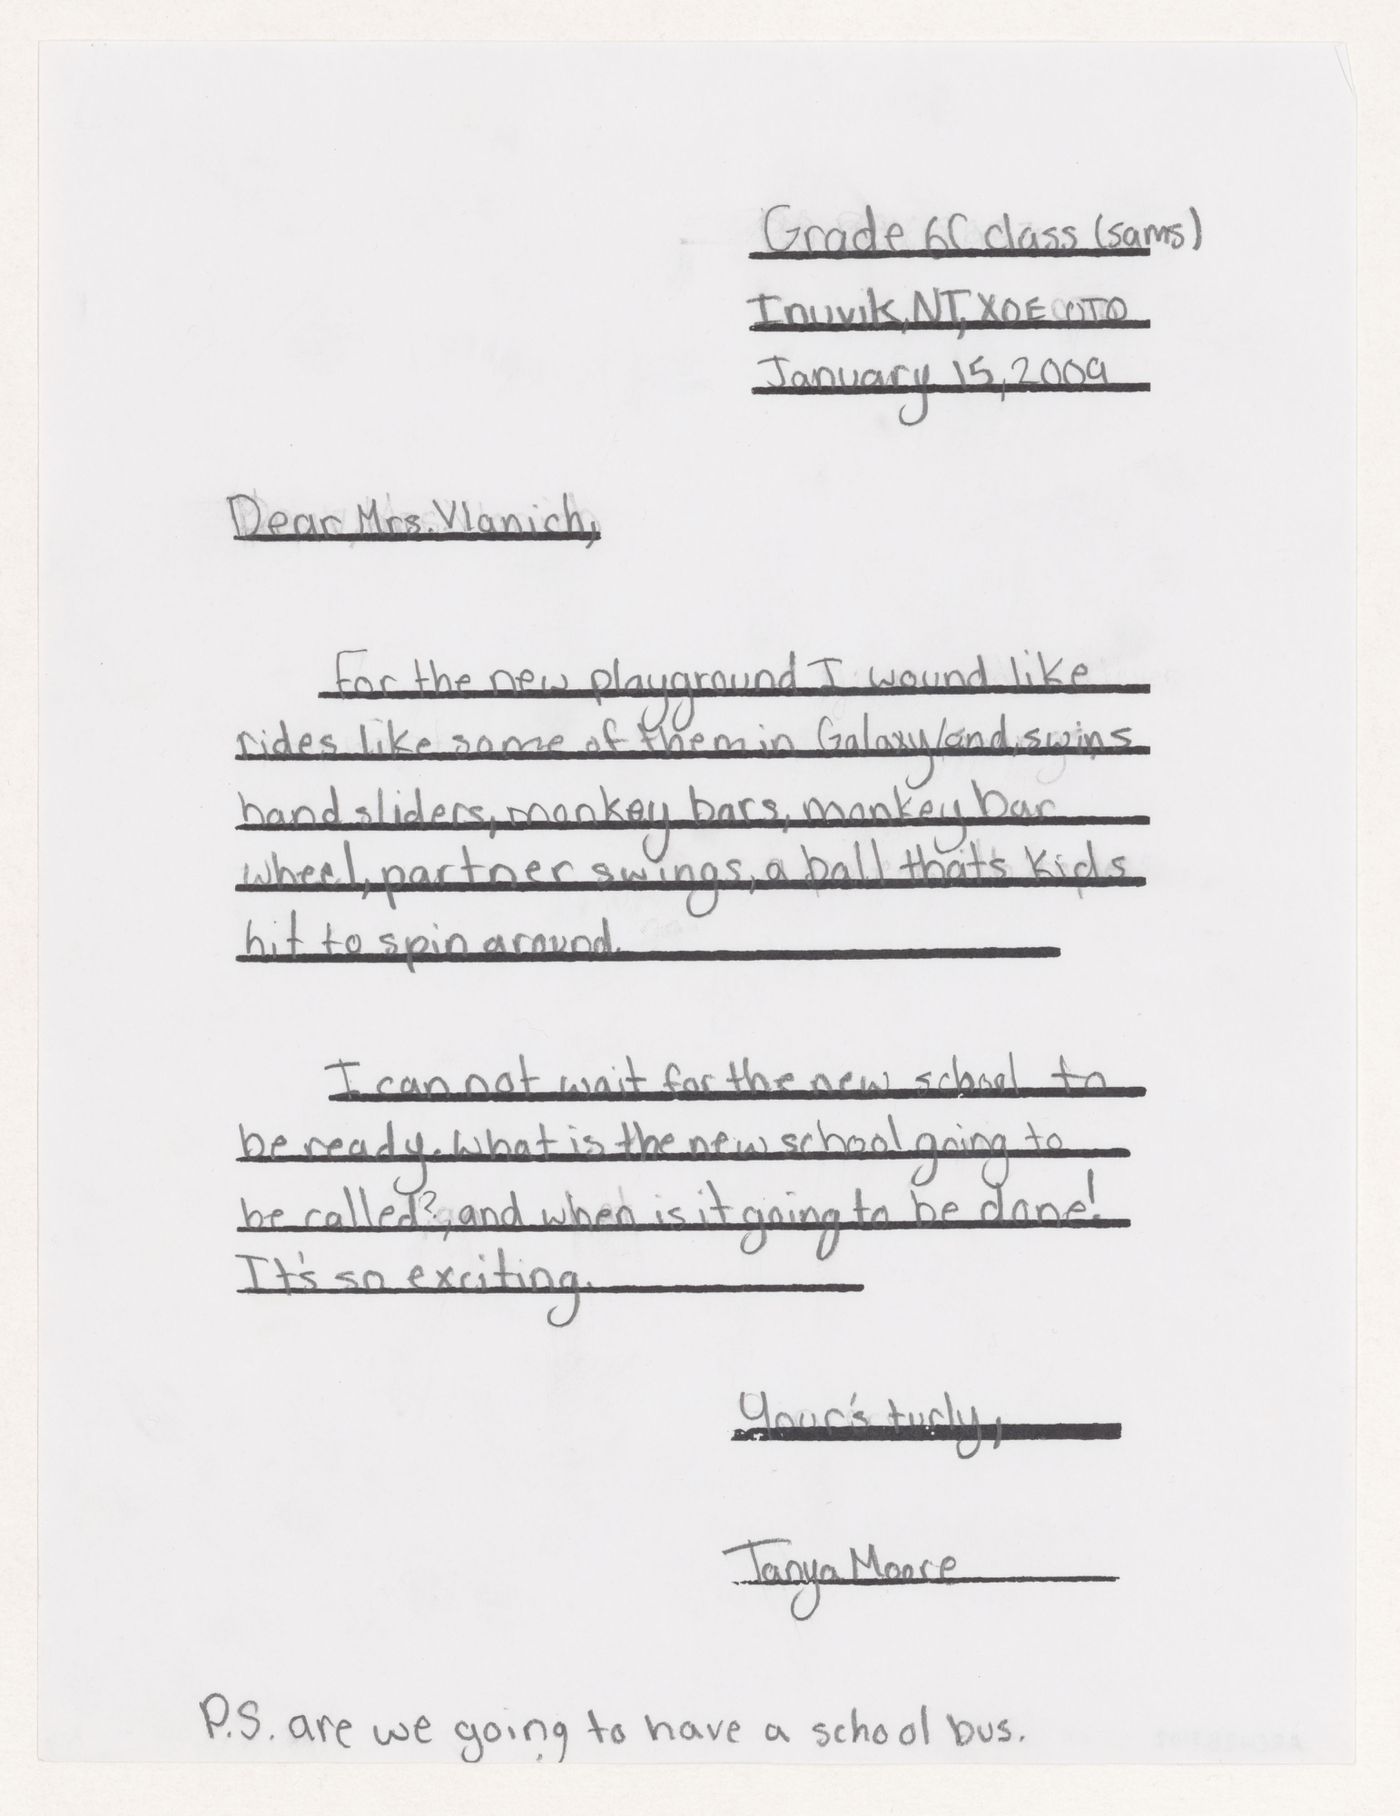 Letter from student for Inuvik School, Inuvik, Northwest Territories